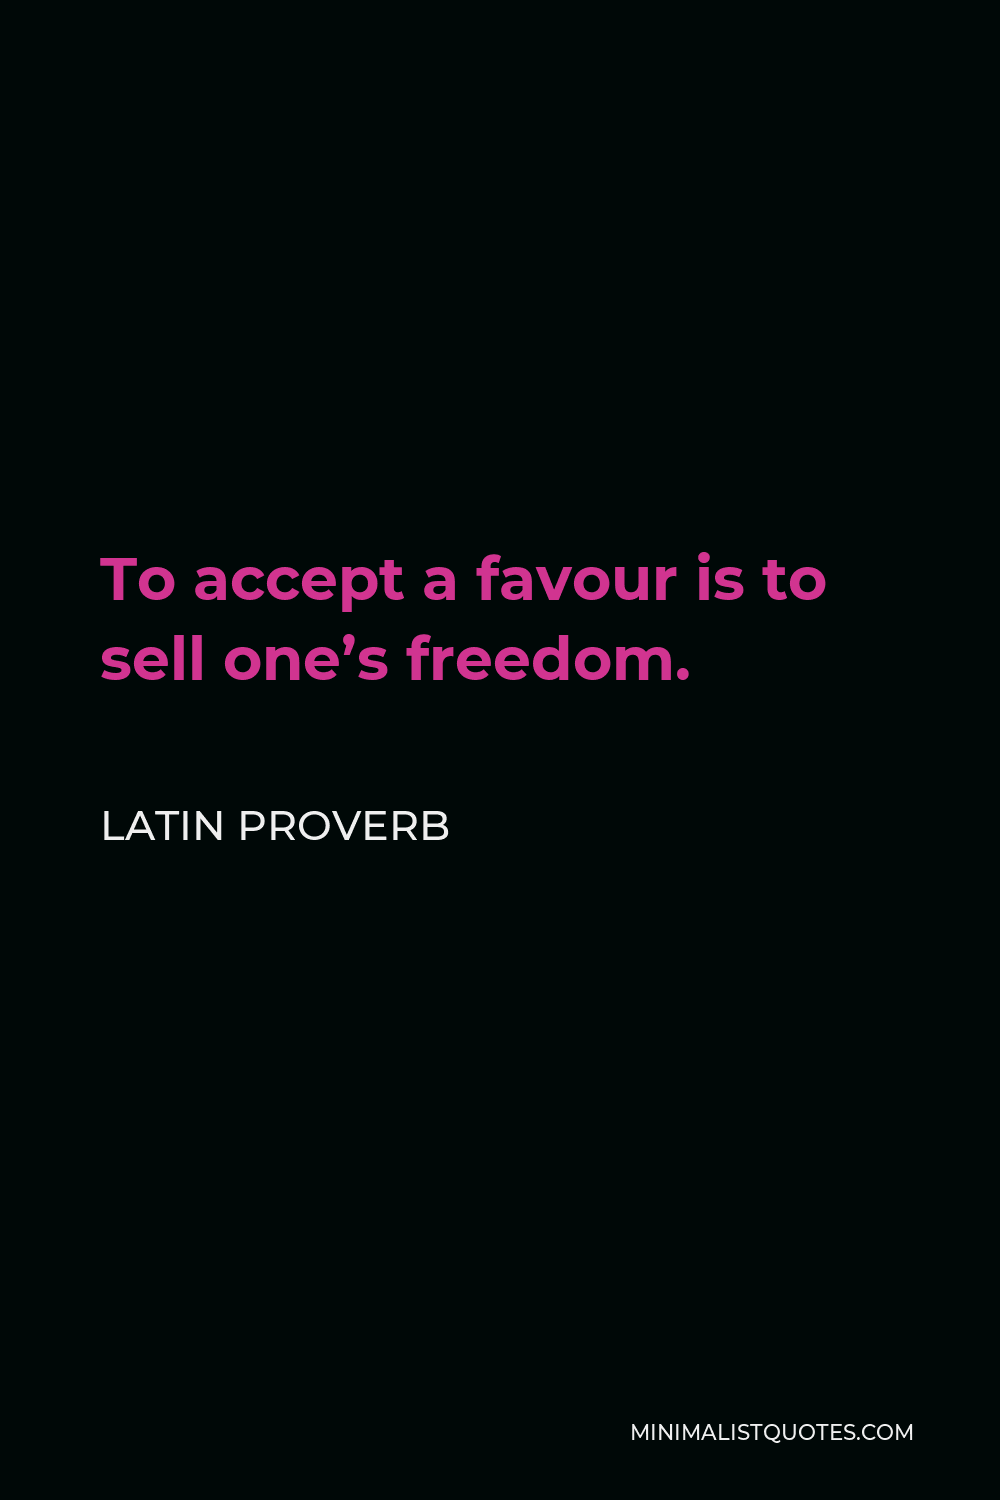 Latin Proverb Quote - To accept a favour is to sell one’s freedom.